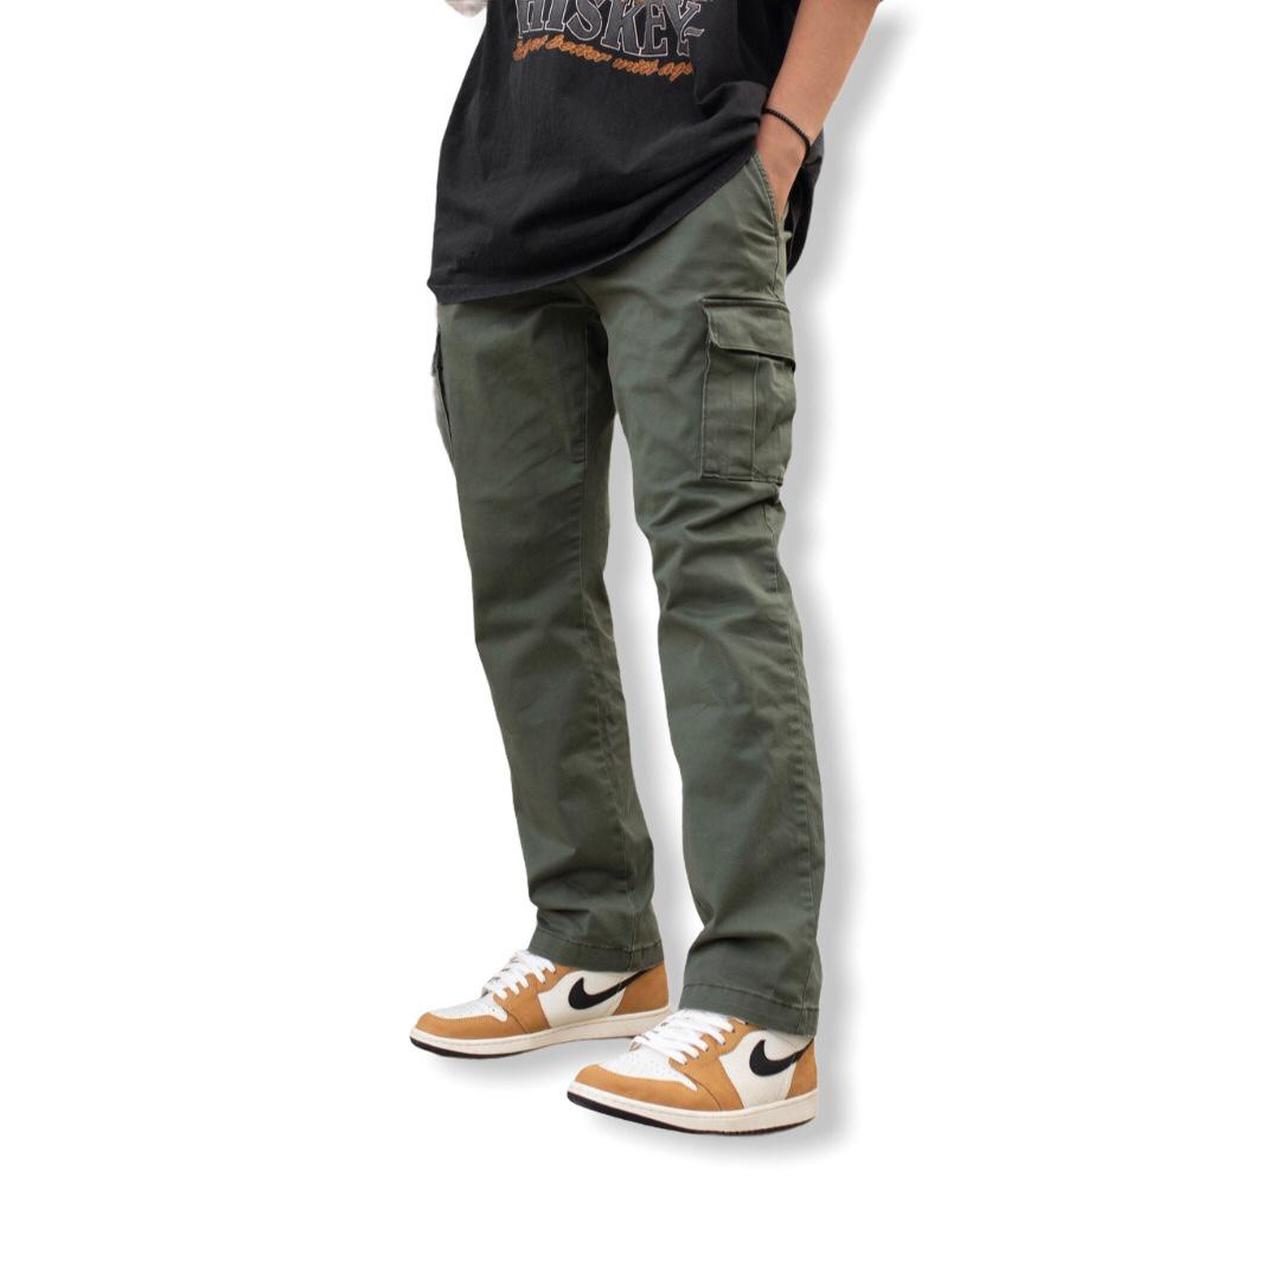 Product Image 1 - Cargo Pants Olive
• Nice fade
•